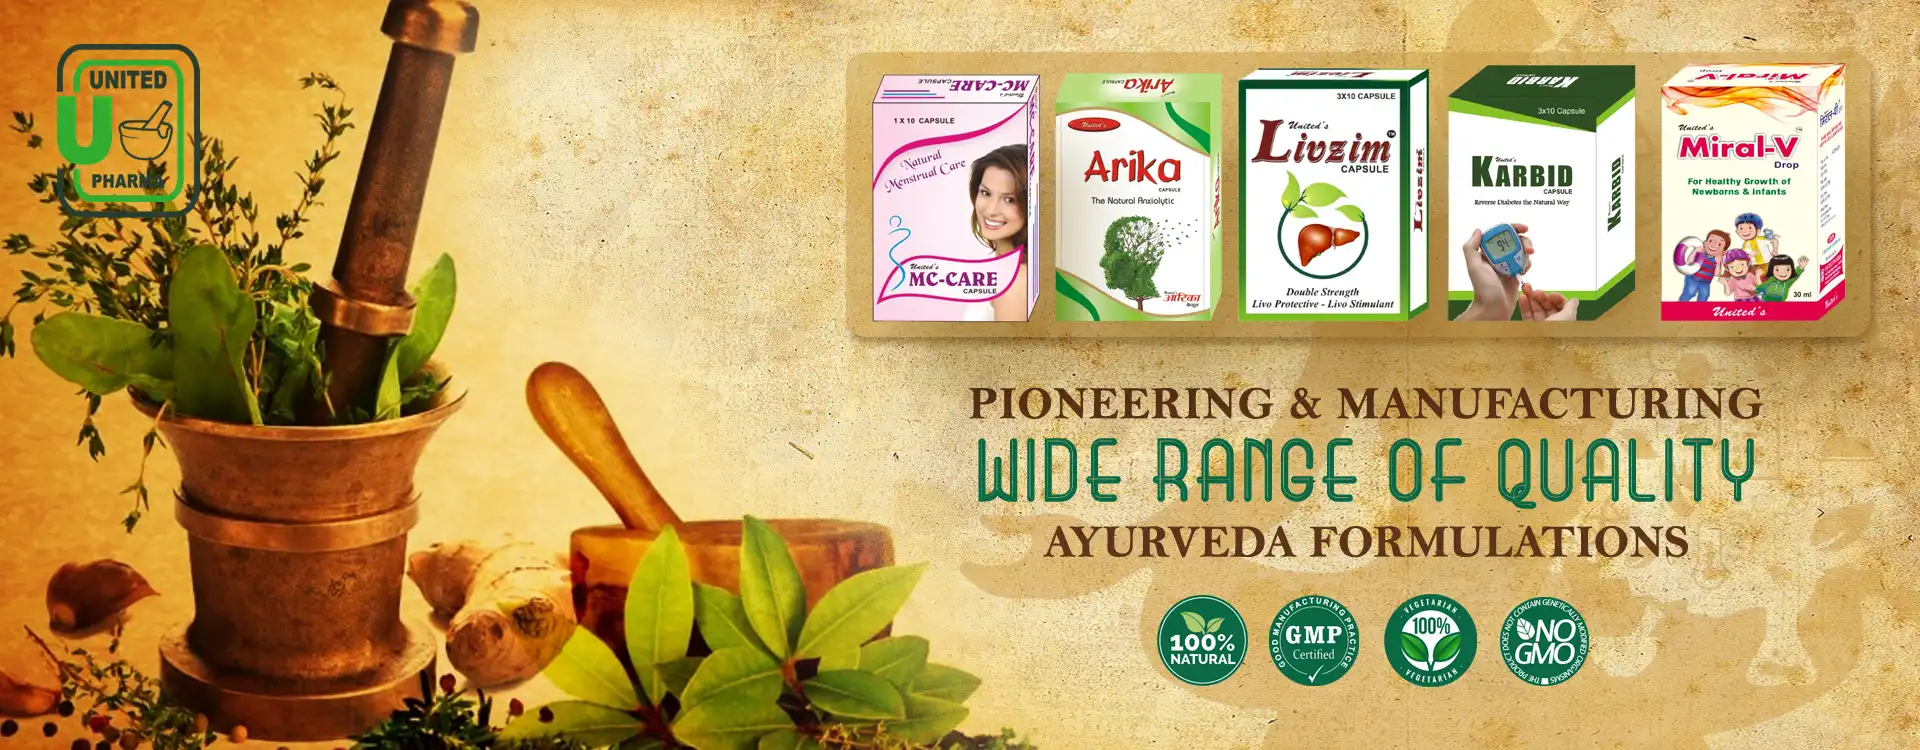 Heal the world with the power of Ayurveda - United Pharma, Kanpur, India